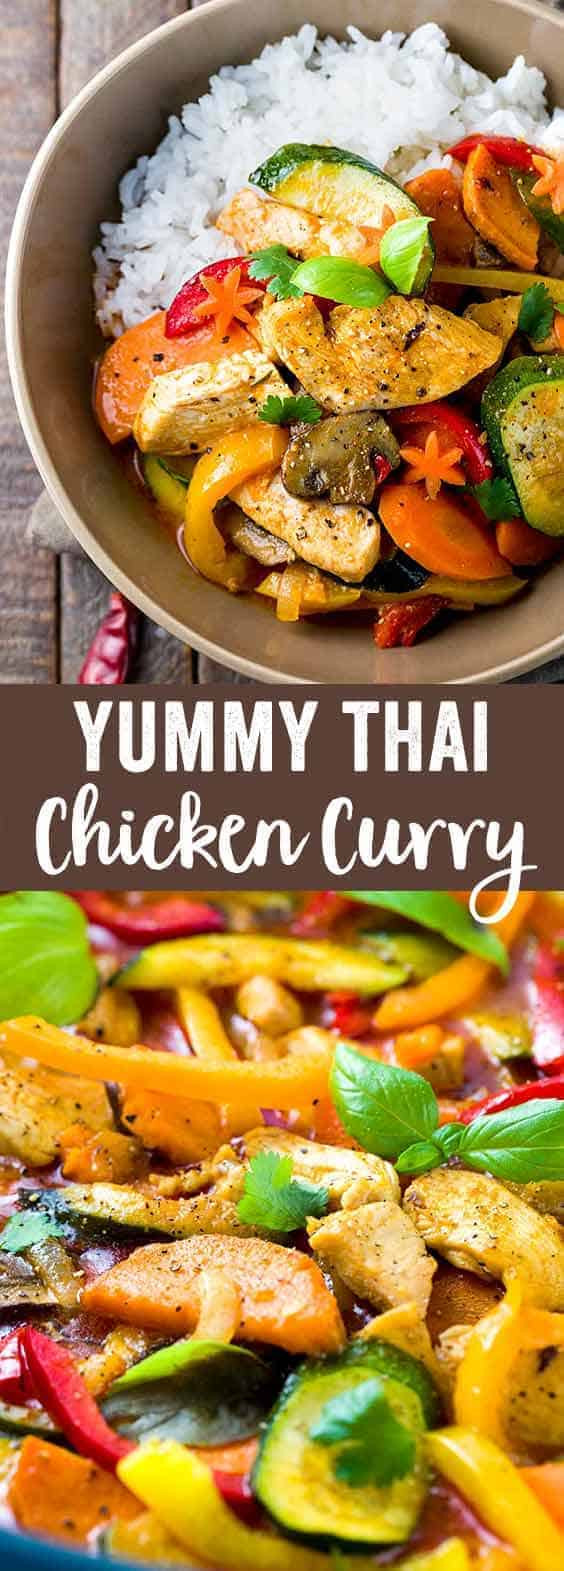 Thai Chicken Curry Recipes With Coconut Milk
 Fast Thai Chicken Curry with Coconut Milk